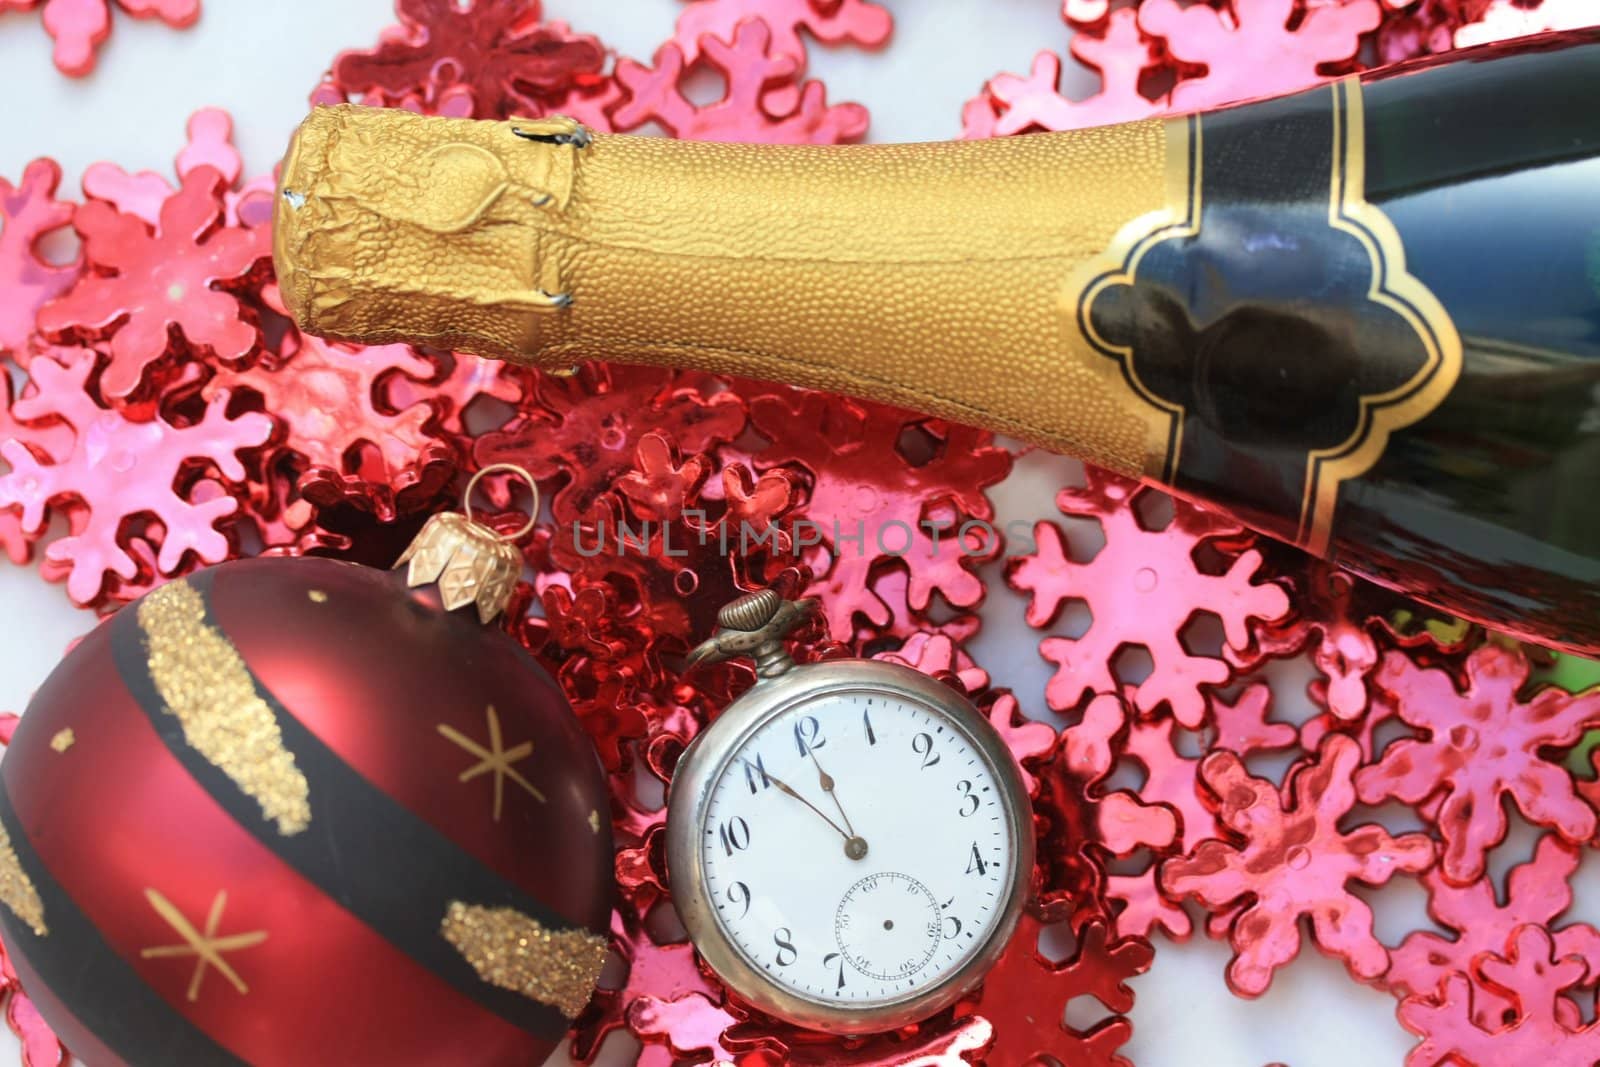 A bottle of champage with a pocket watch and red christmas decorations